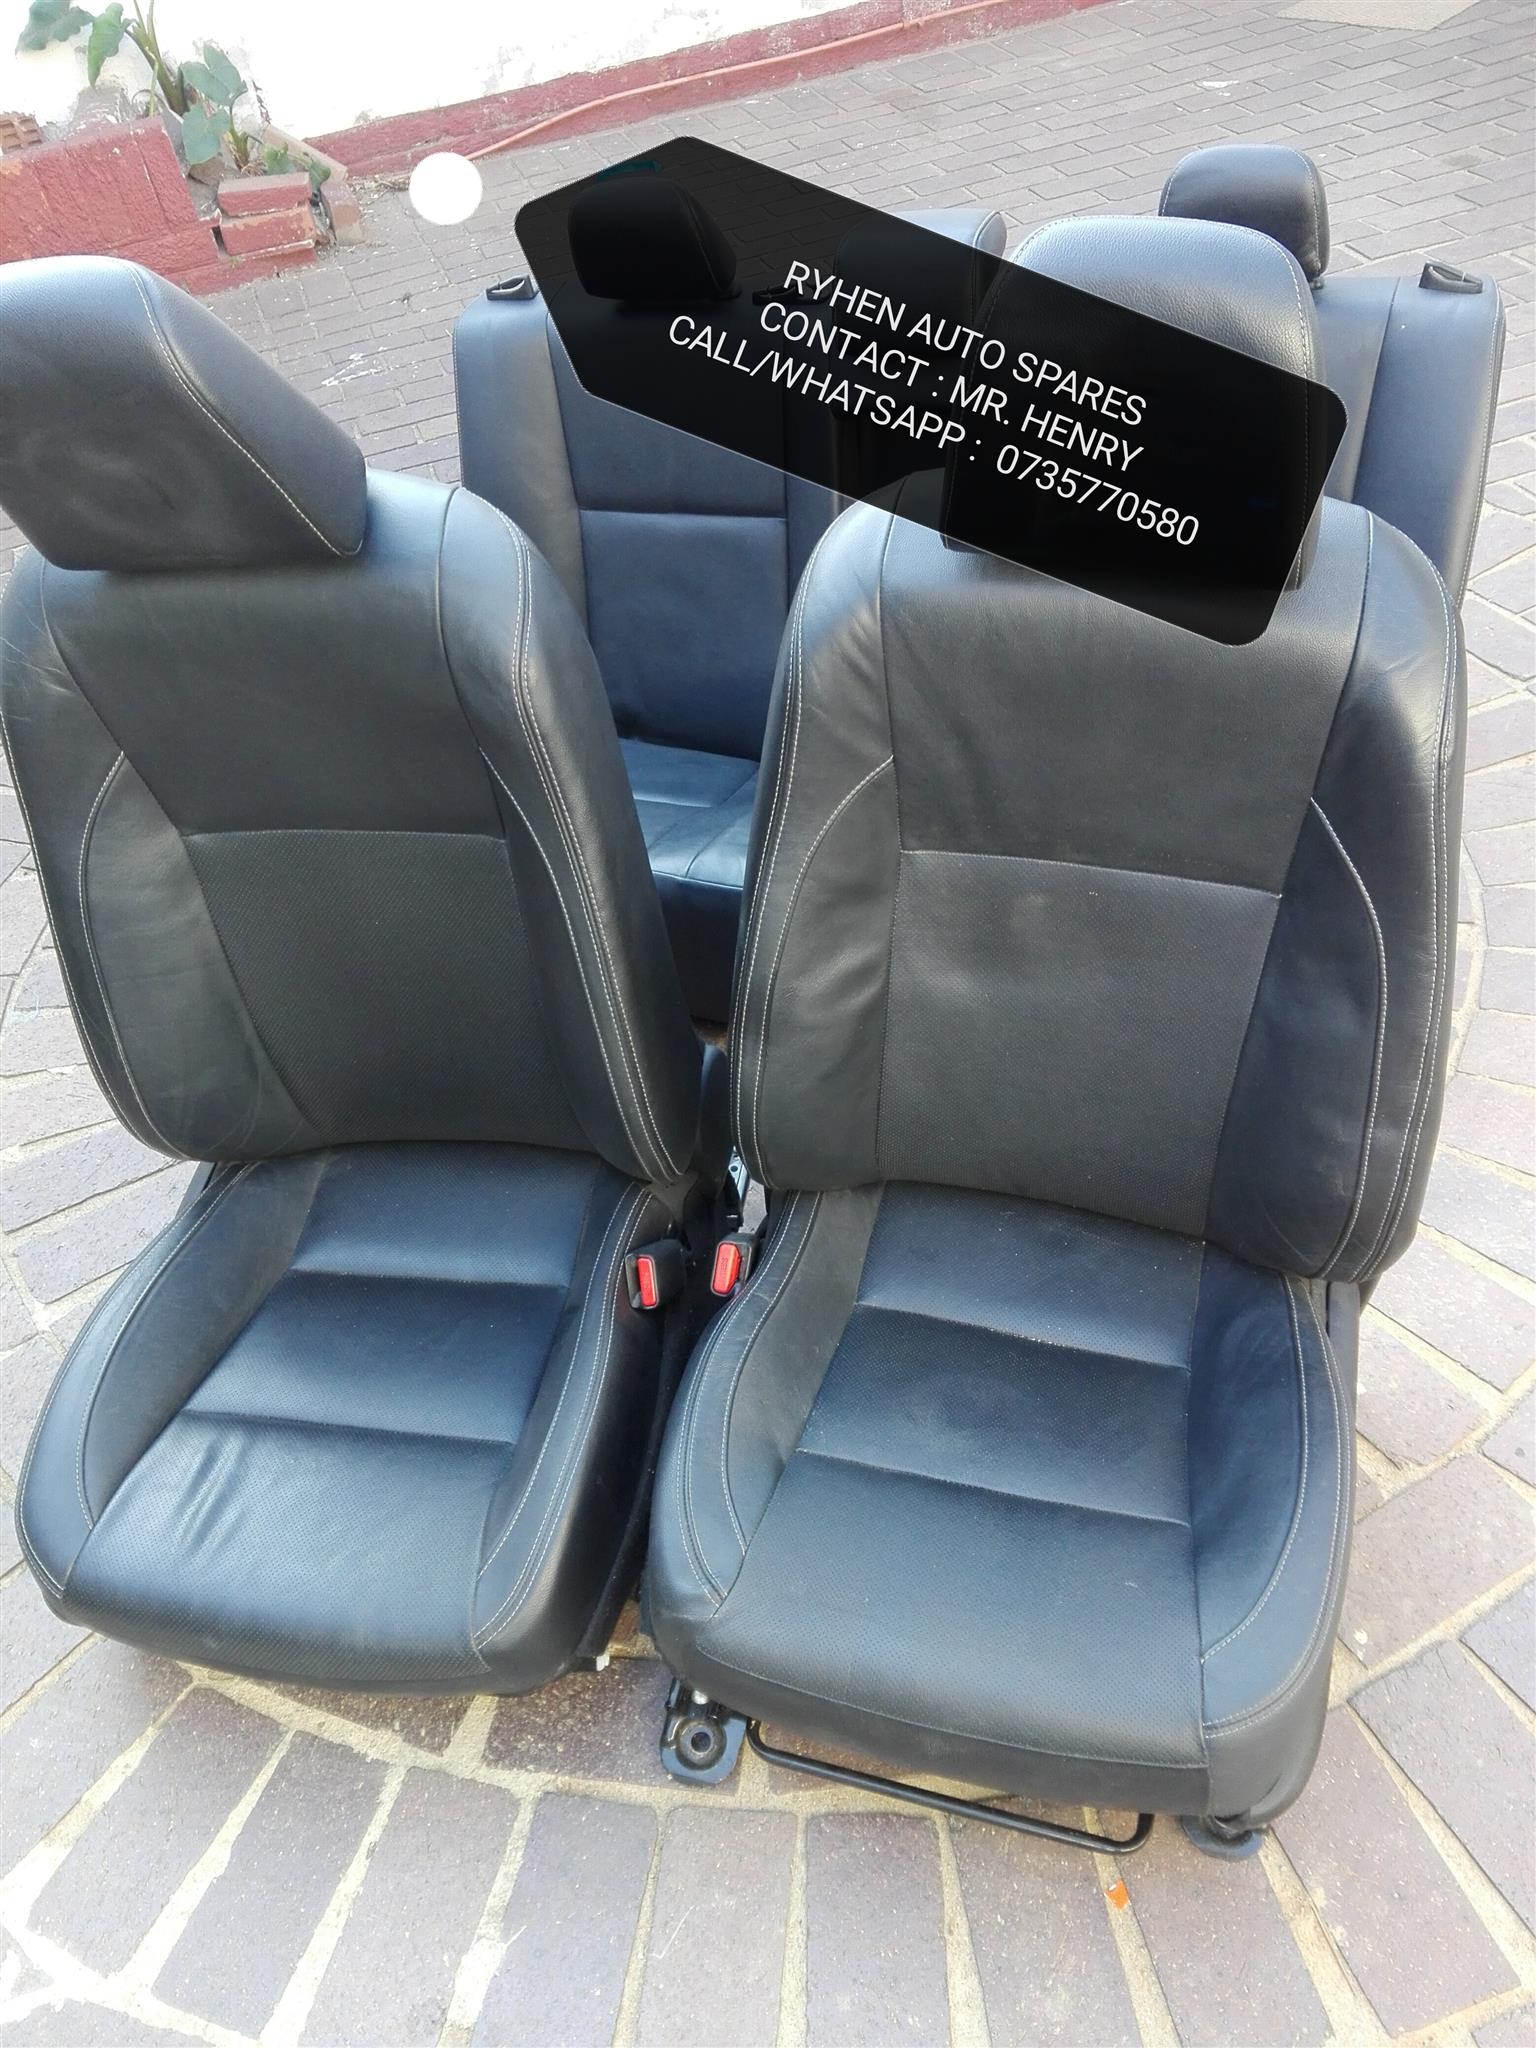 Toyota Conquest Seats For Sale | vlr.eng.br